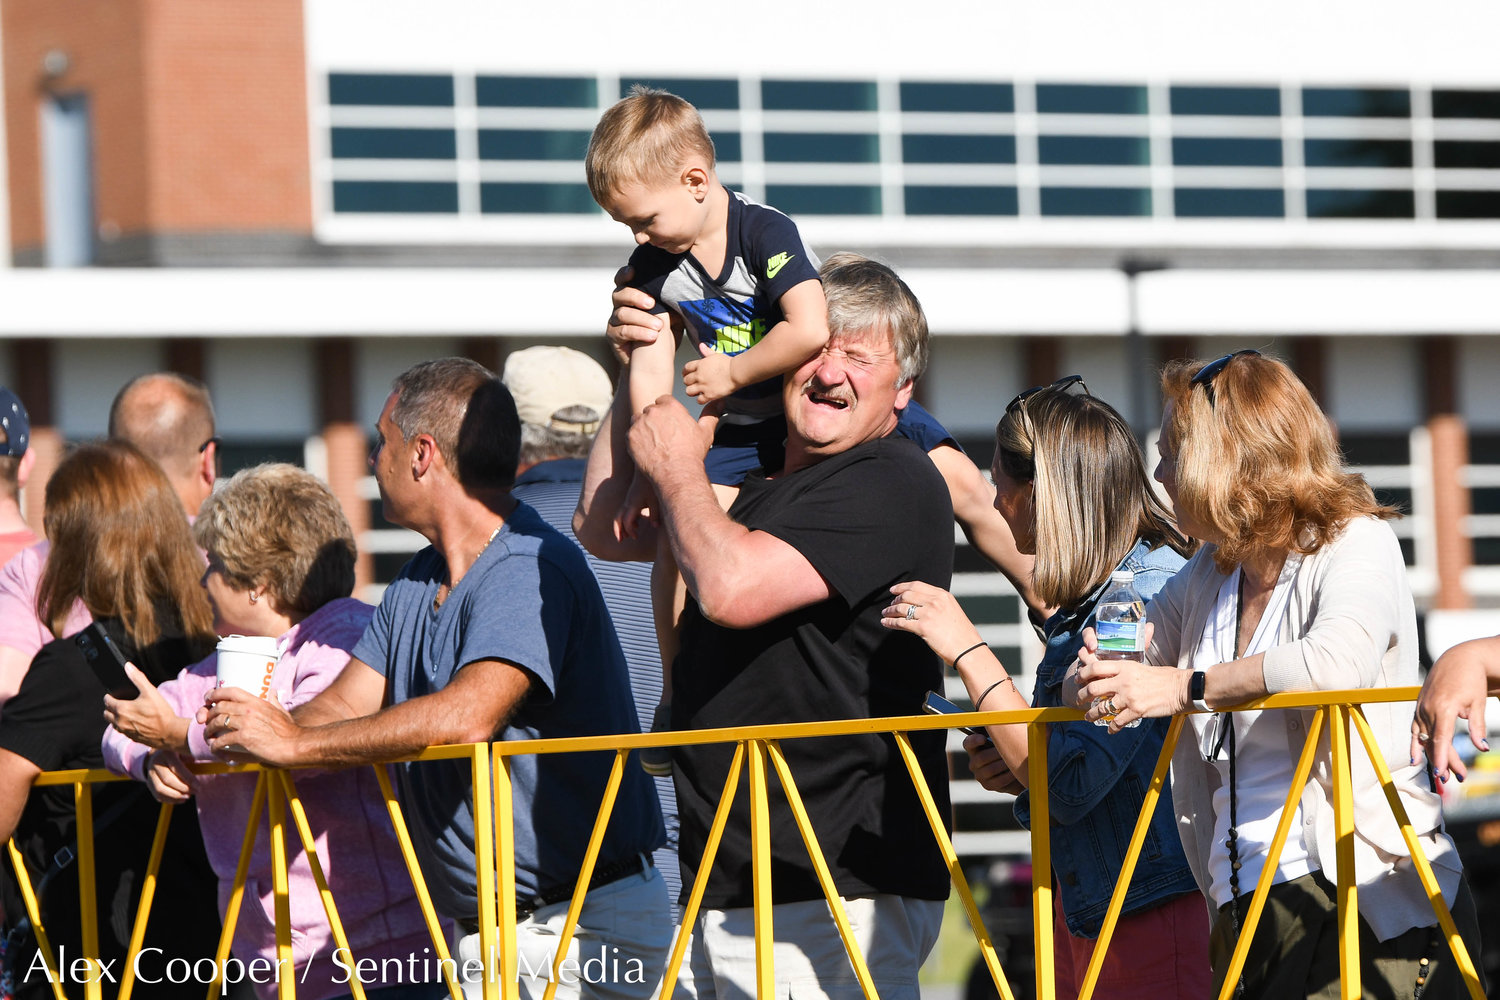 A young boy tries to get a better view at the race during the Utica National Kids Run at Mohawk Valley Community College in Utica on Saturday.